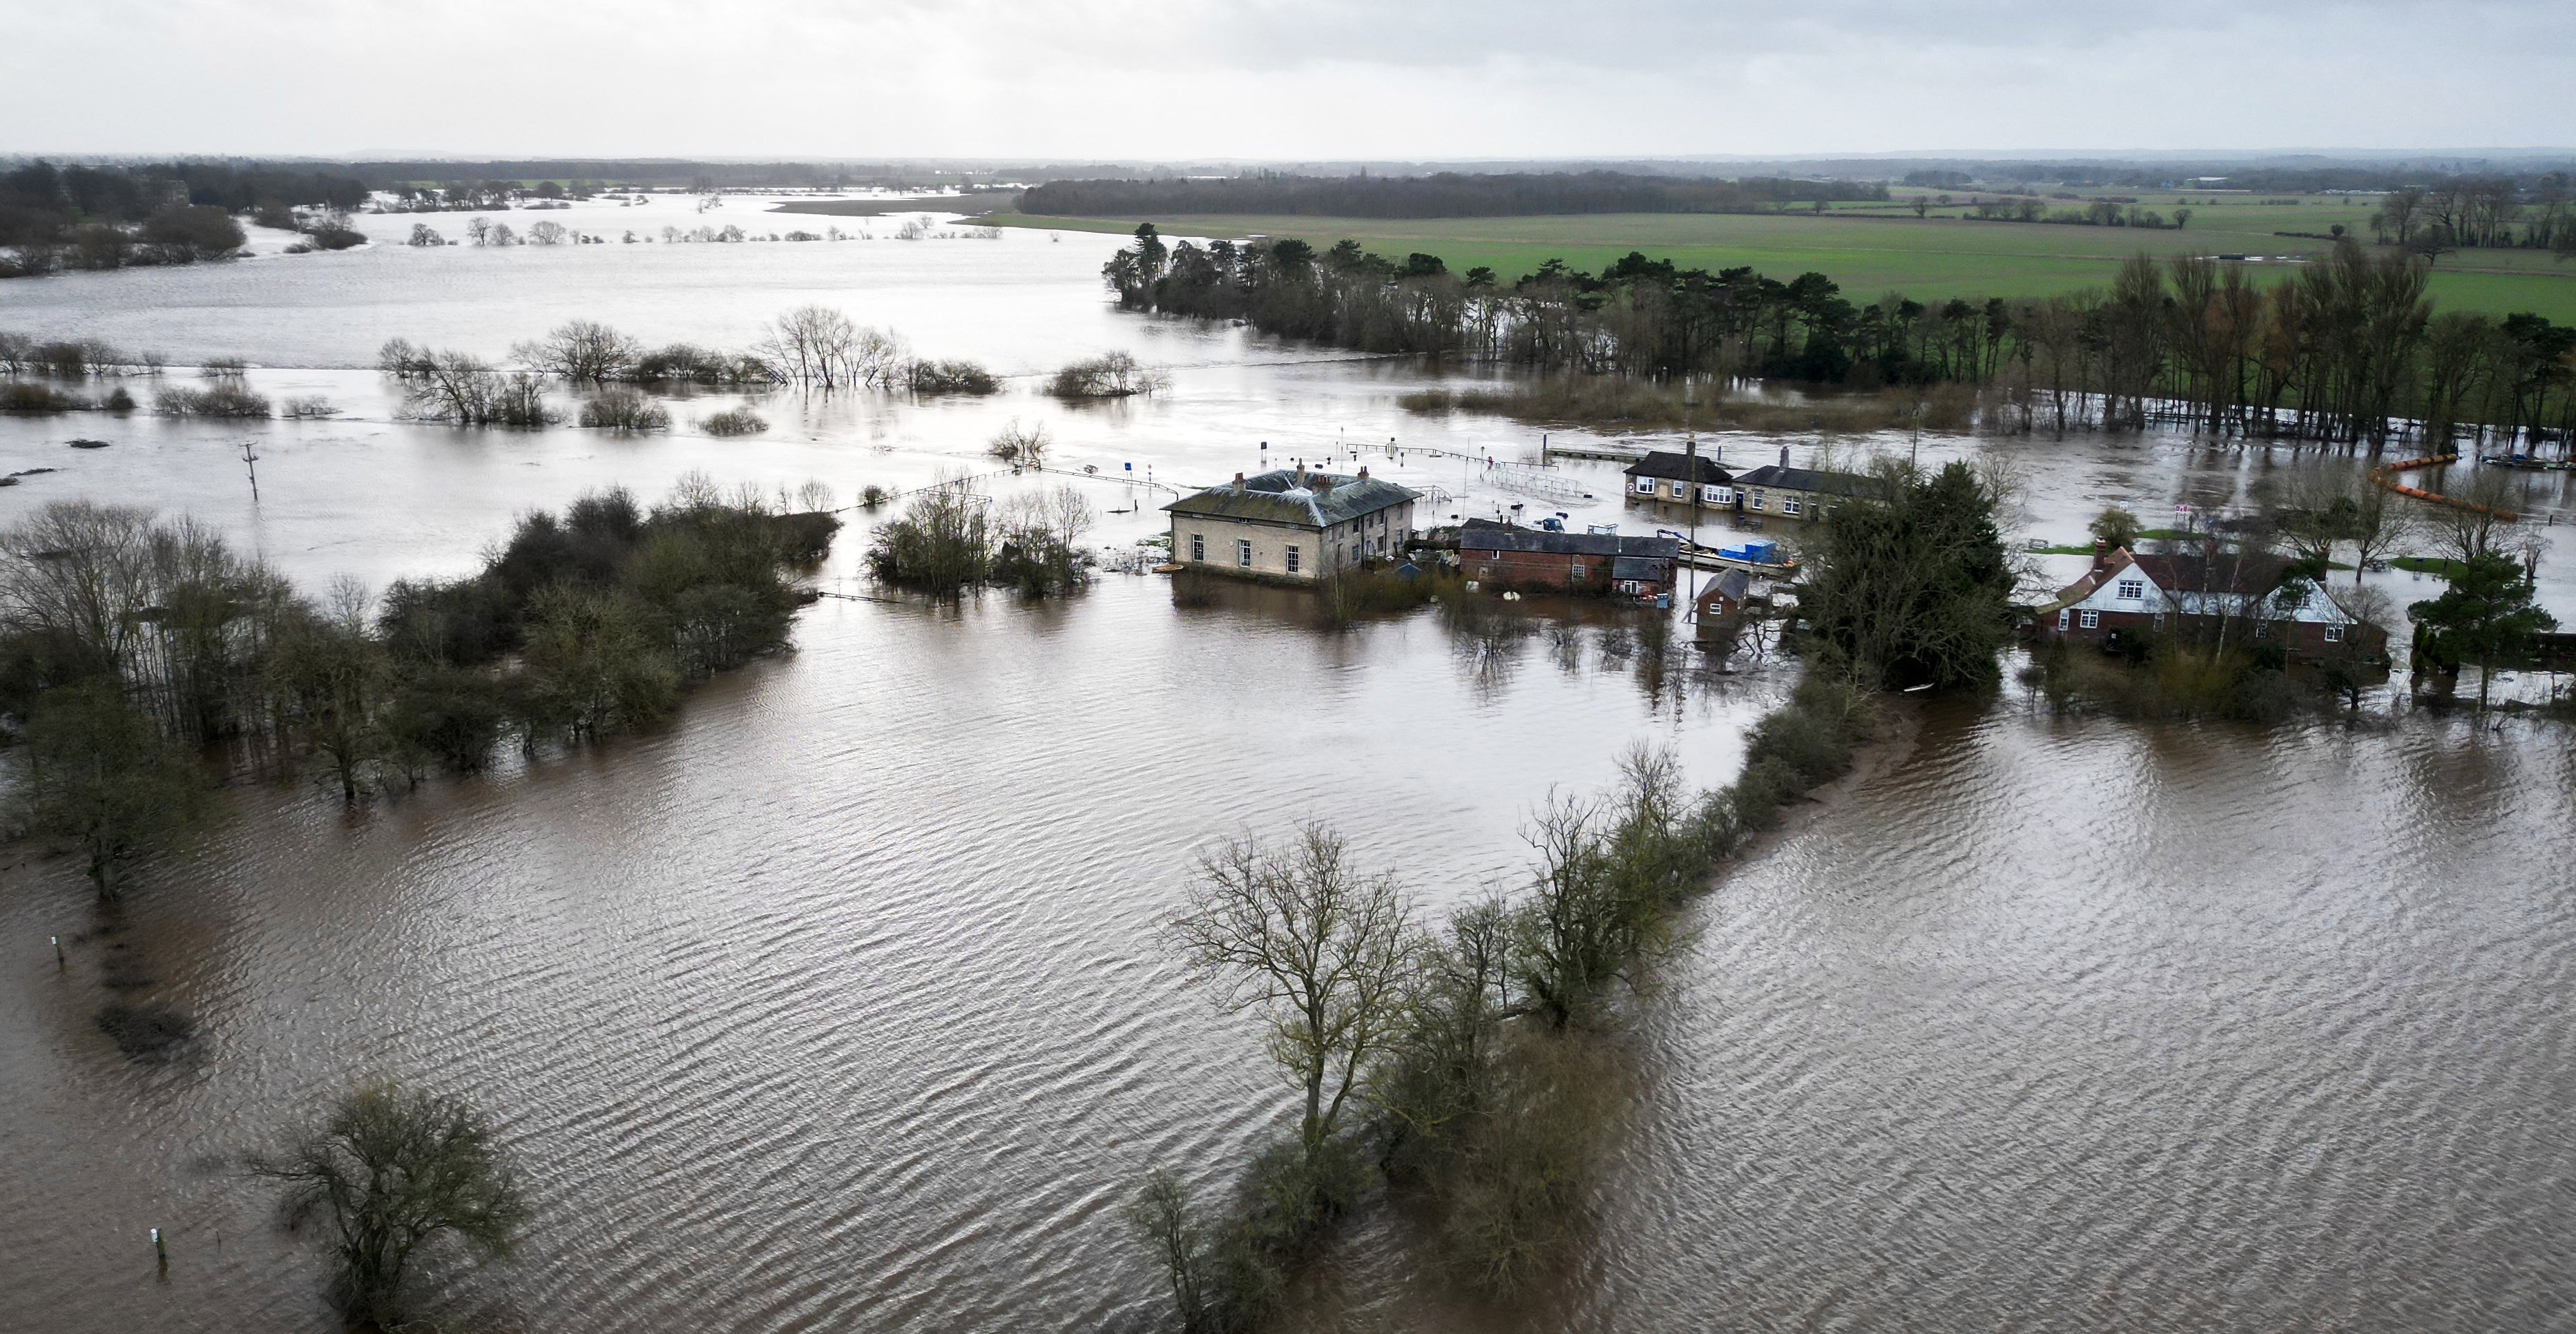 Areas in northern England were floode following the bursting of the banks of the River Ouse following Storm Jocelyn